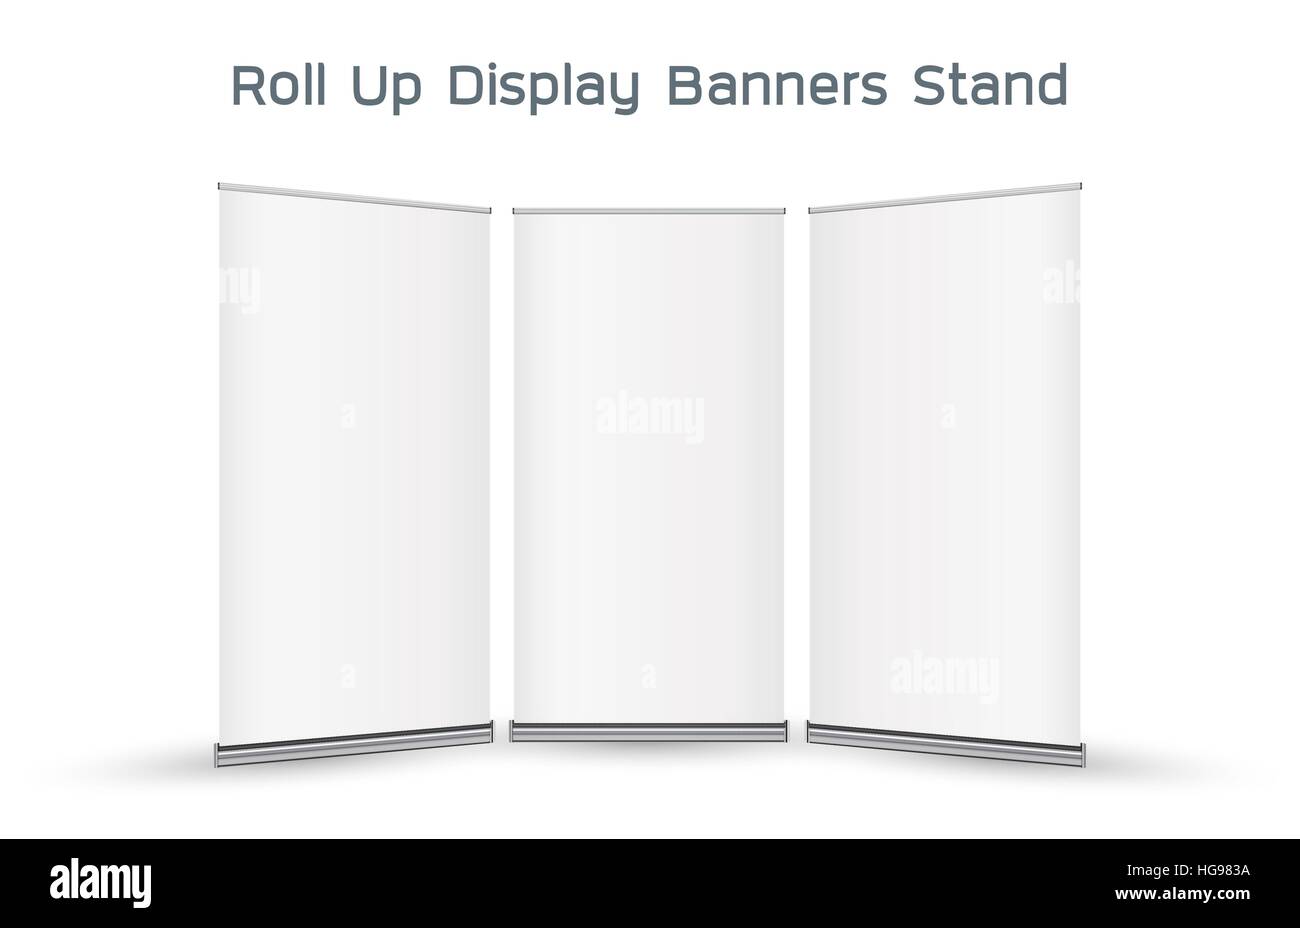 Real 3d roll up display banner stand Illustrazione Vettoriale